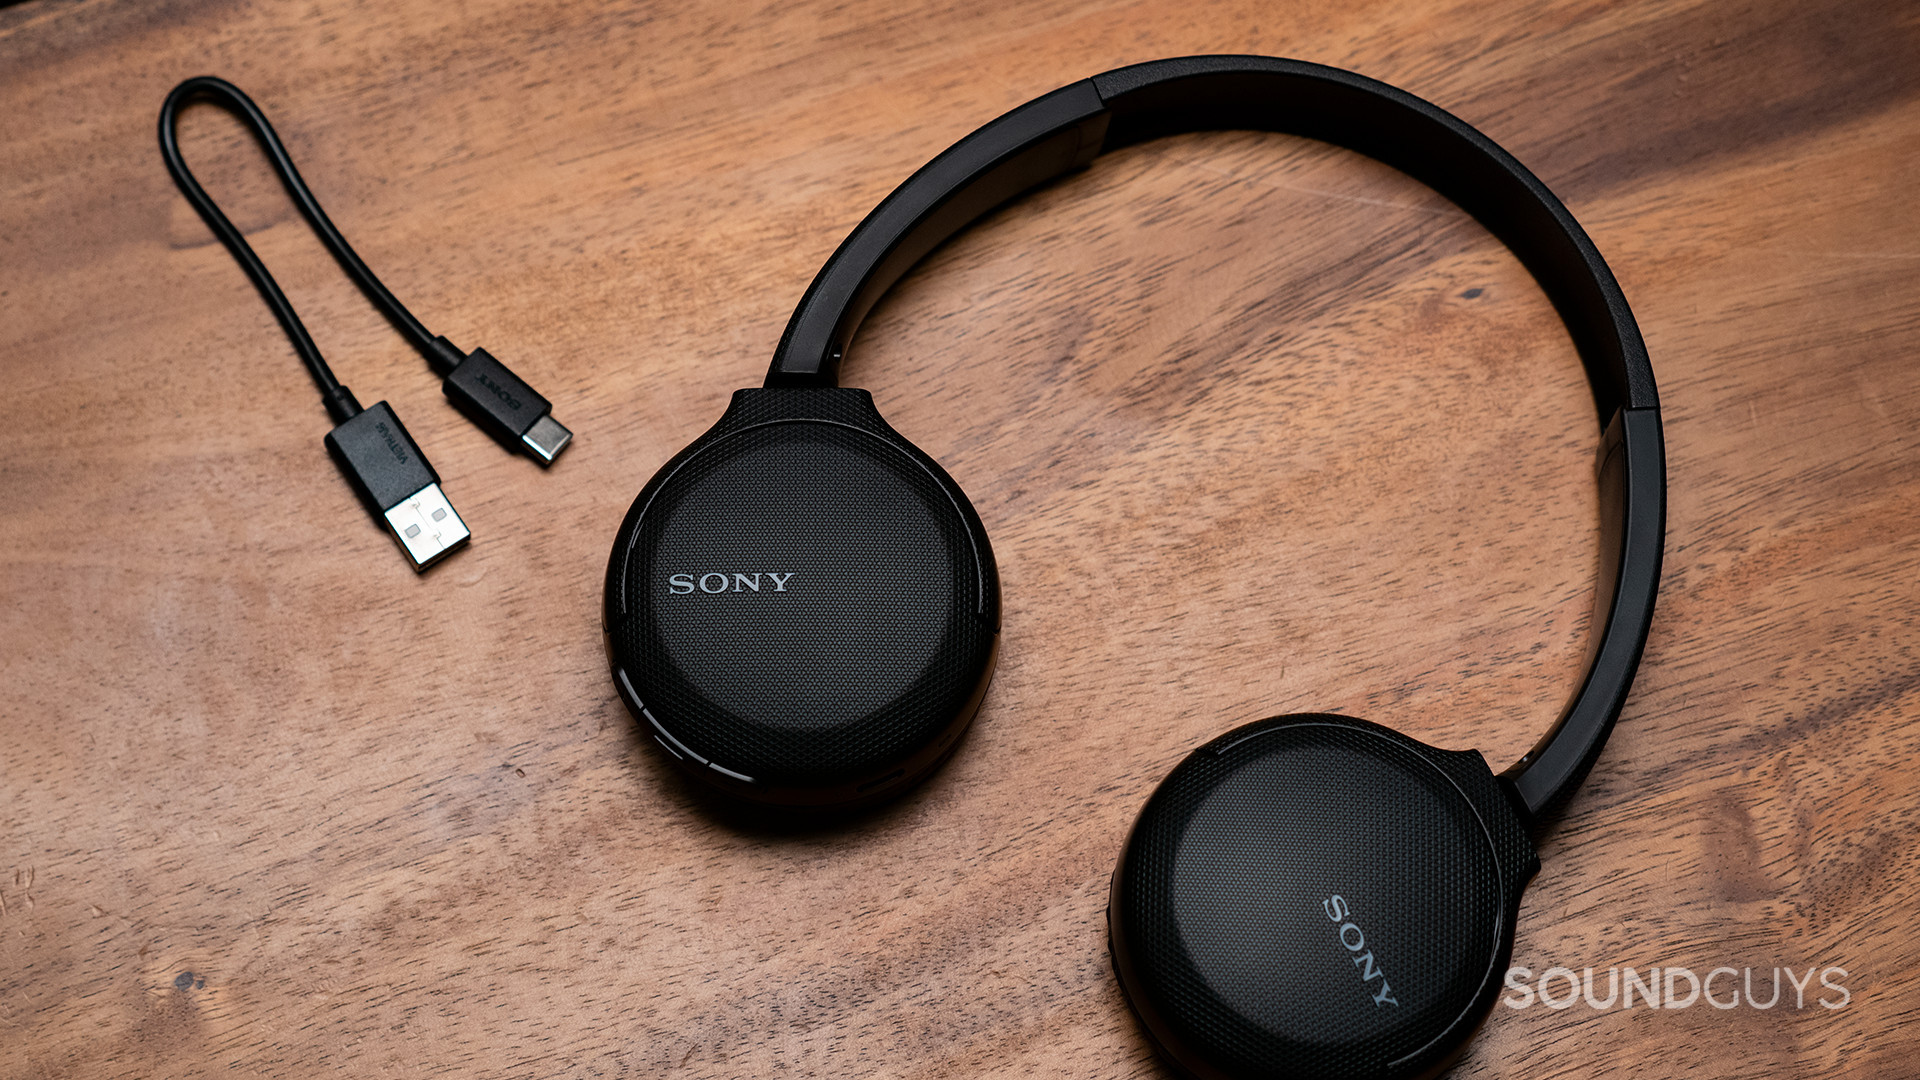 The Sony WH-CH510 wireless on-ear headphones with the USB-C charging cable.